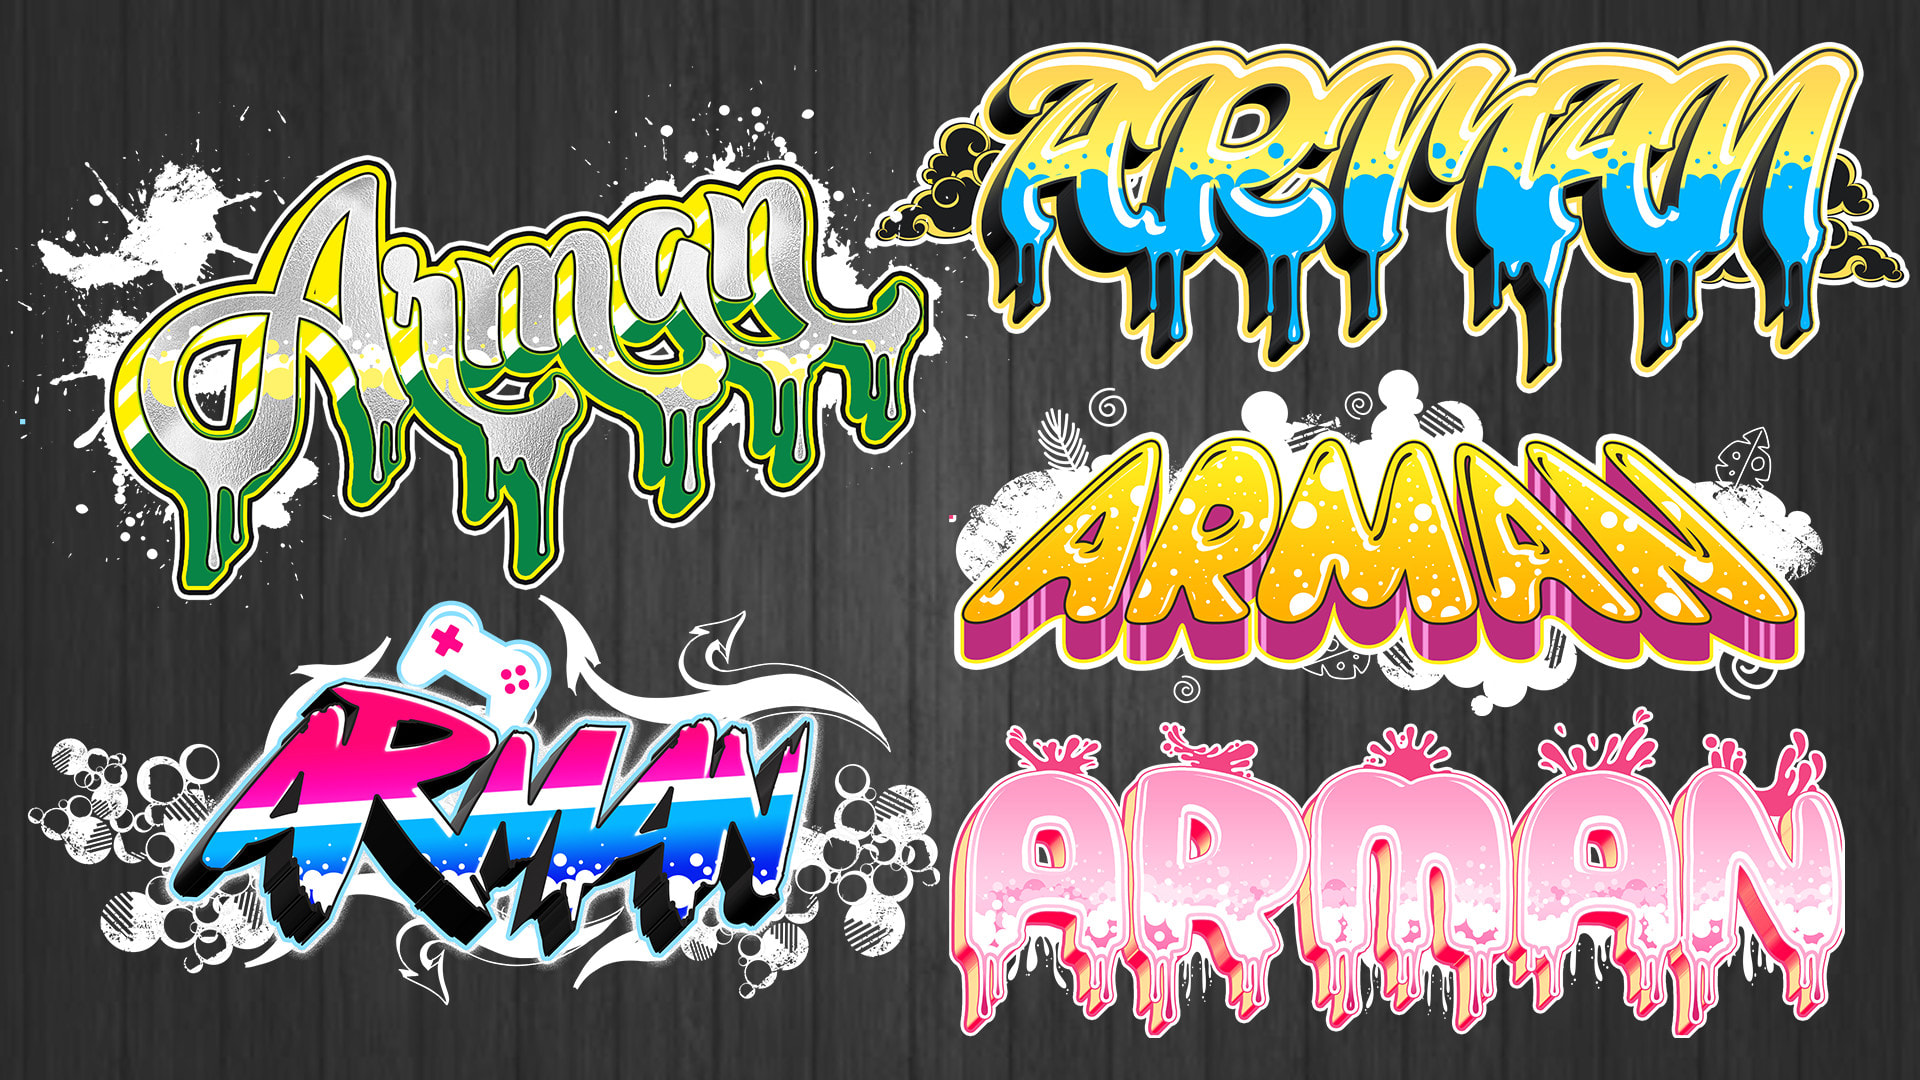 Design Awesome 3d Typography Logo With Your Name Or Text In Graffiti Art Style By Karaoke Fiverr